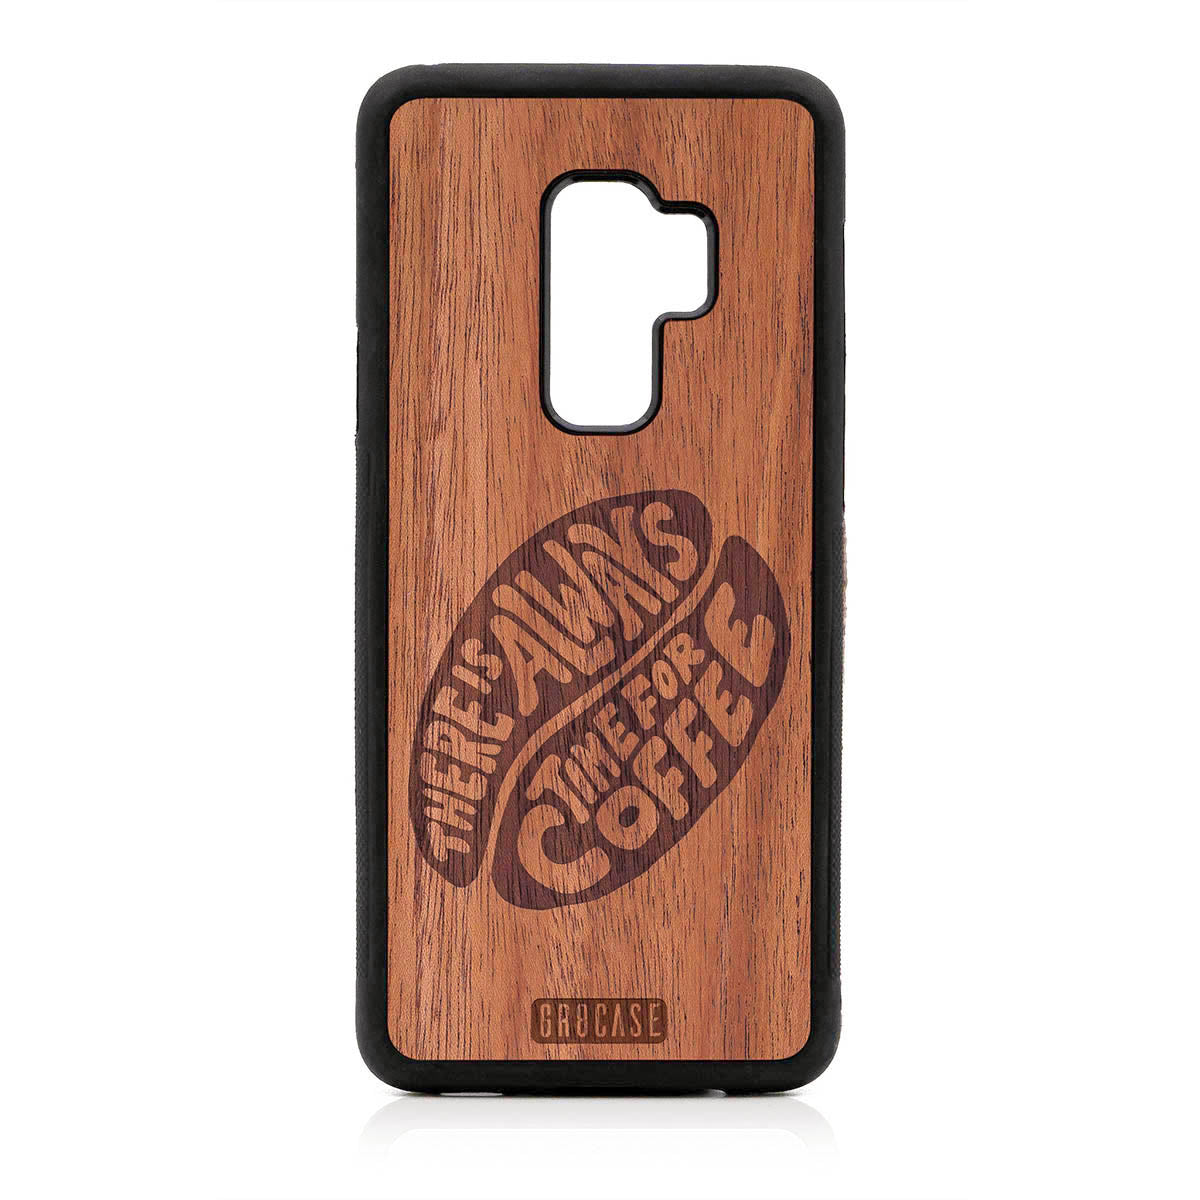 There Is Always Time For Coffee Design Wood Case For Samsung Galaxy S9 Plus